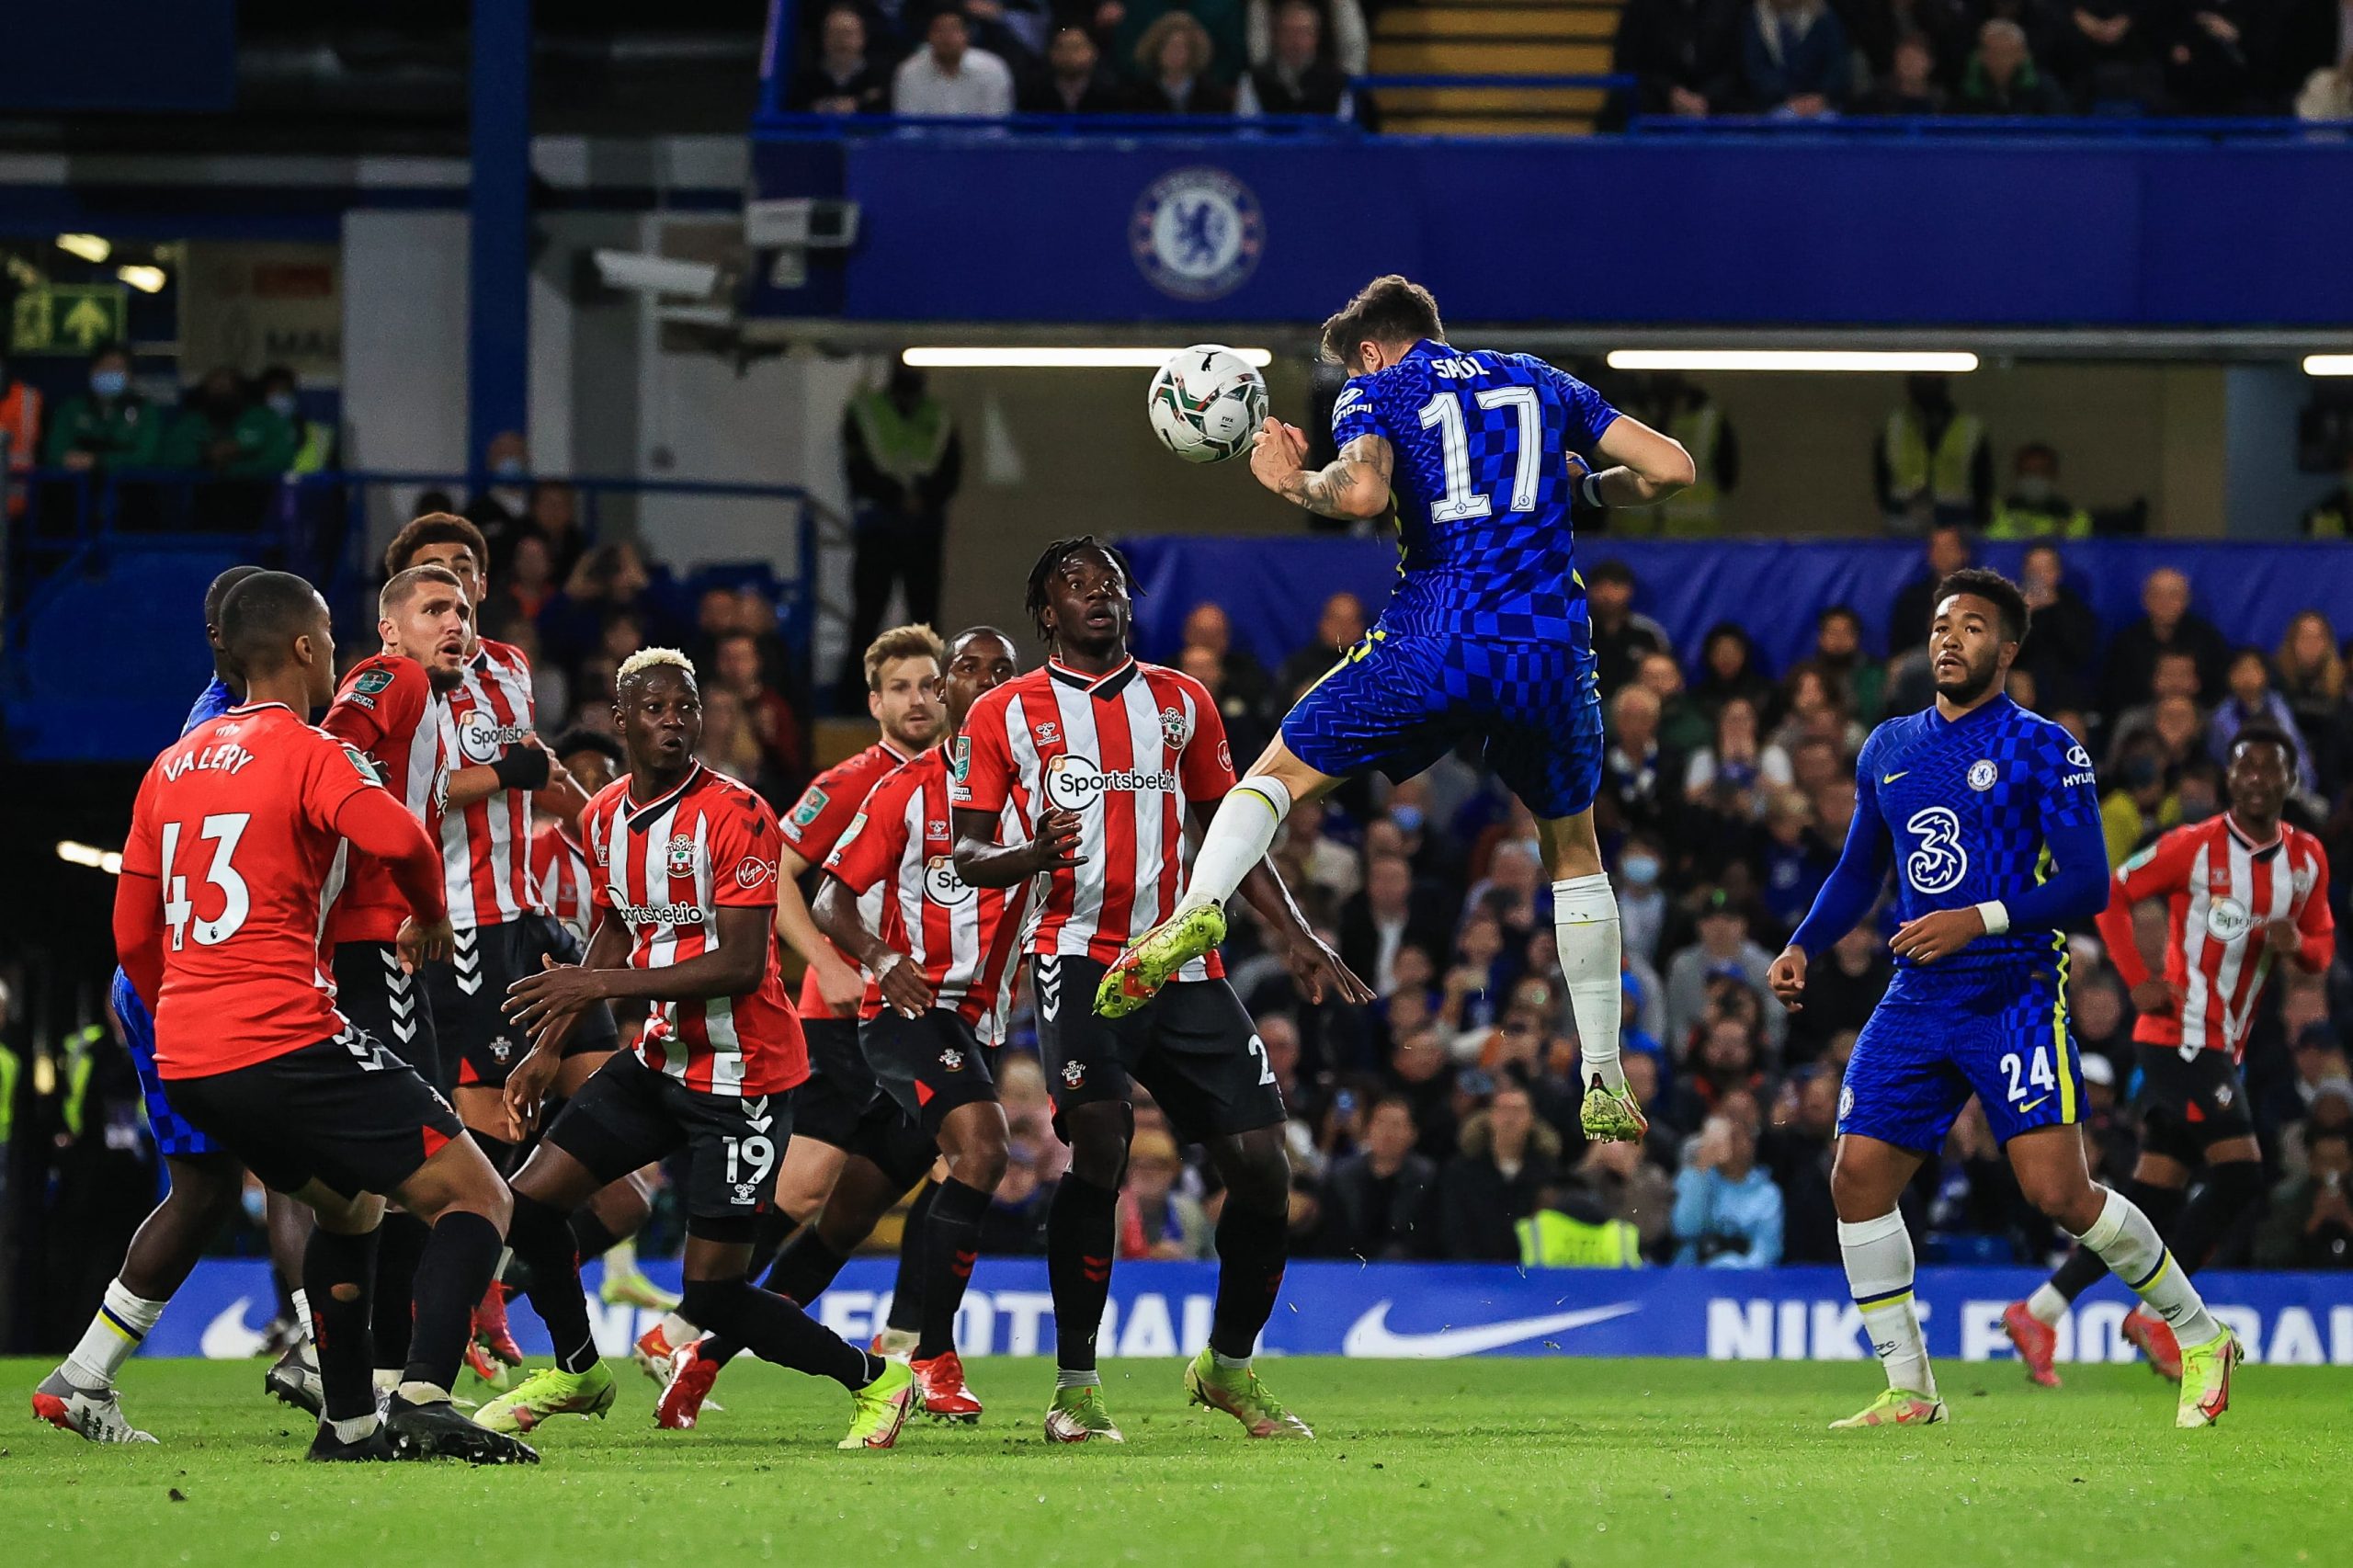 Saul Ñiguez #17 of Chelsea heads on goal but is saved by Fraser Forster #44 of Southampton